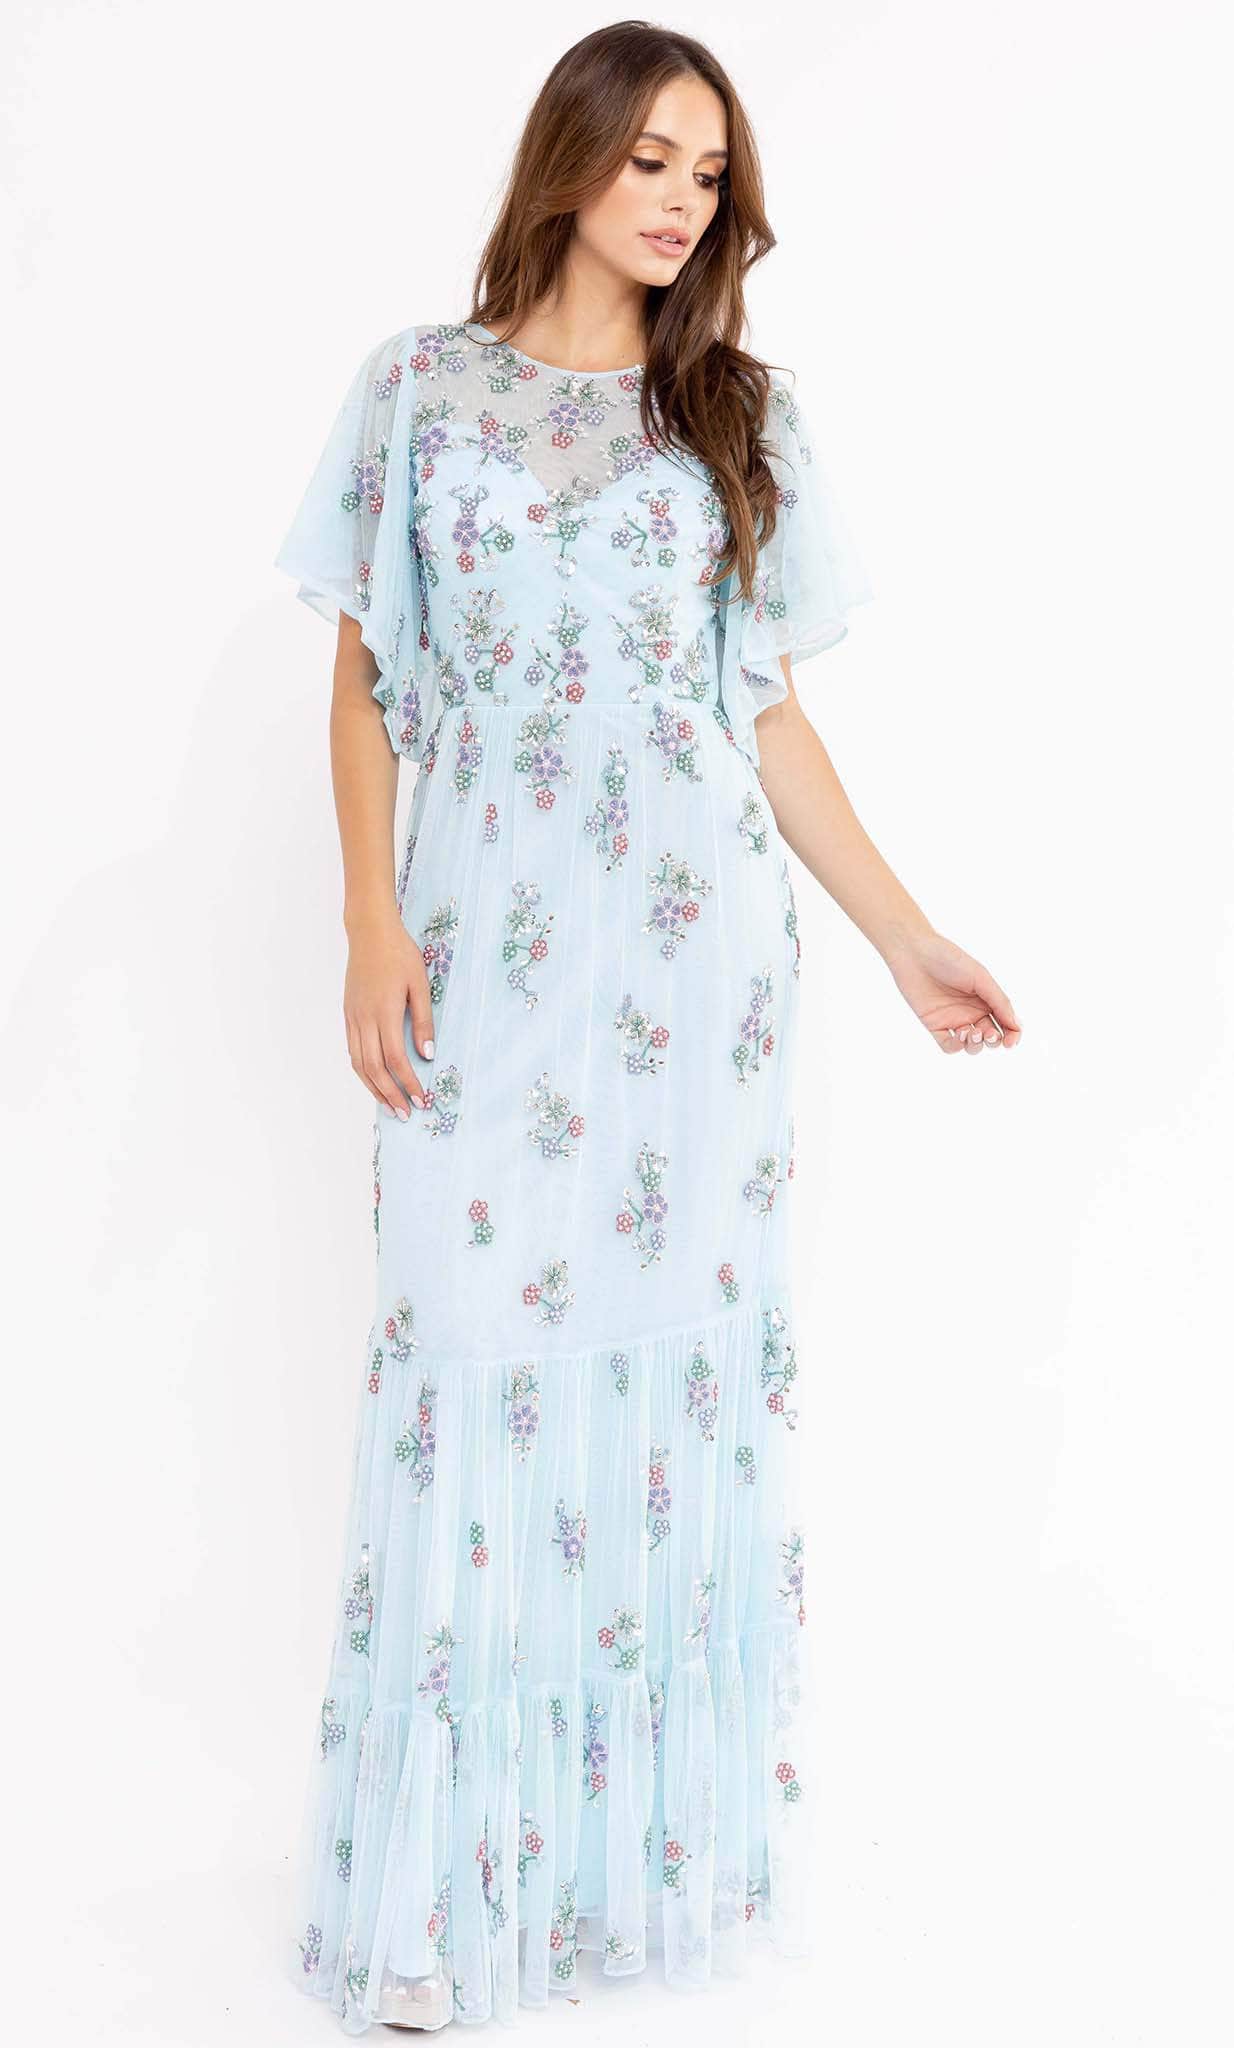 Primavera Couture 13108 - Soft-Looking Floral Long Dress Mother Of The Bride Dresses 4 / Powder Blue